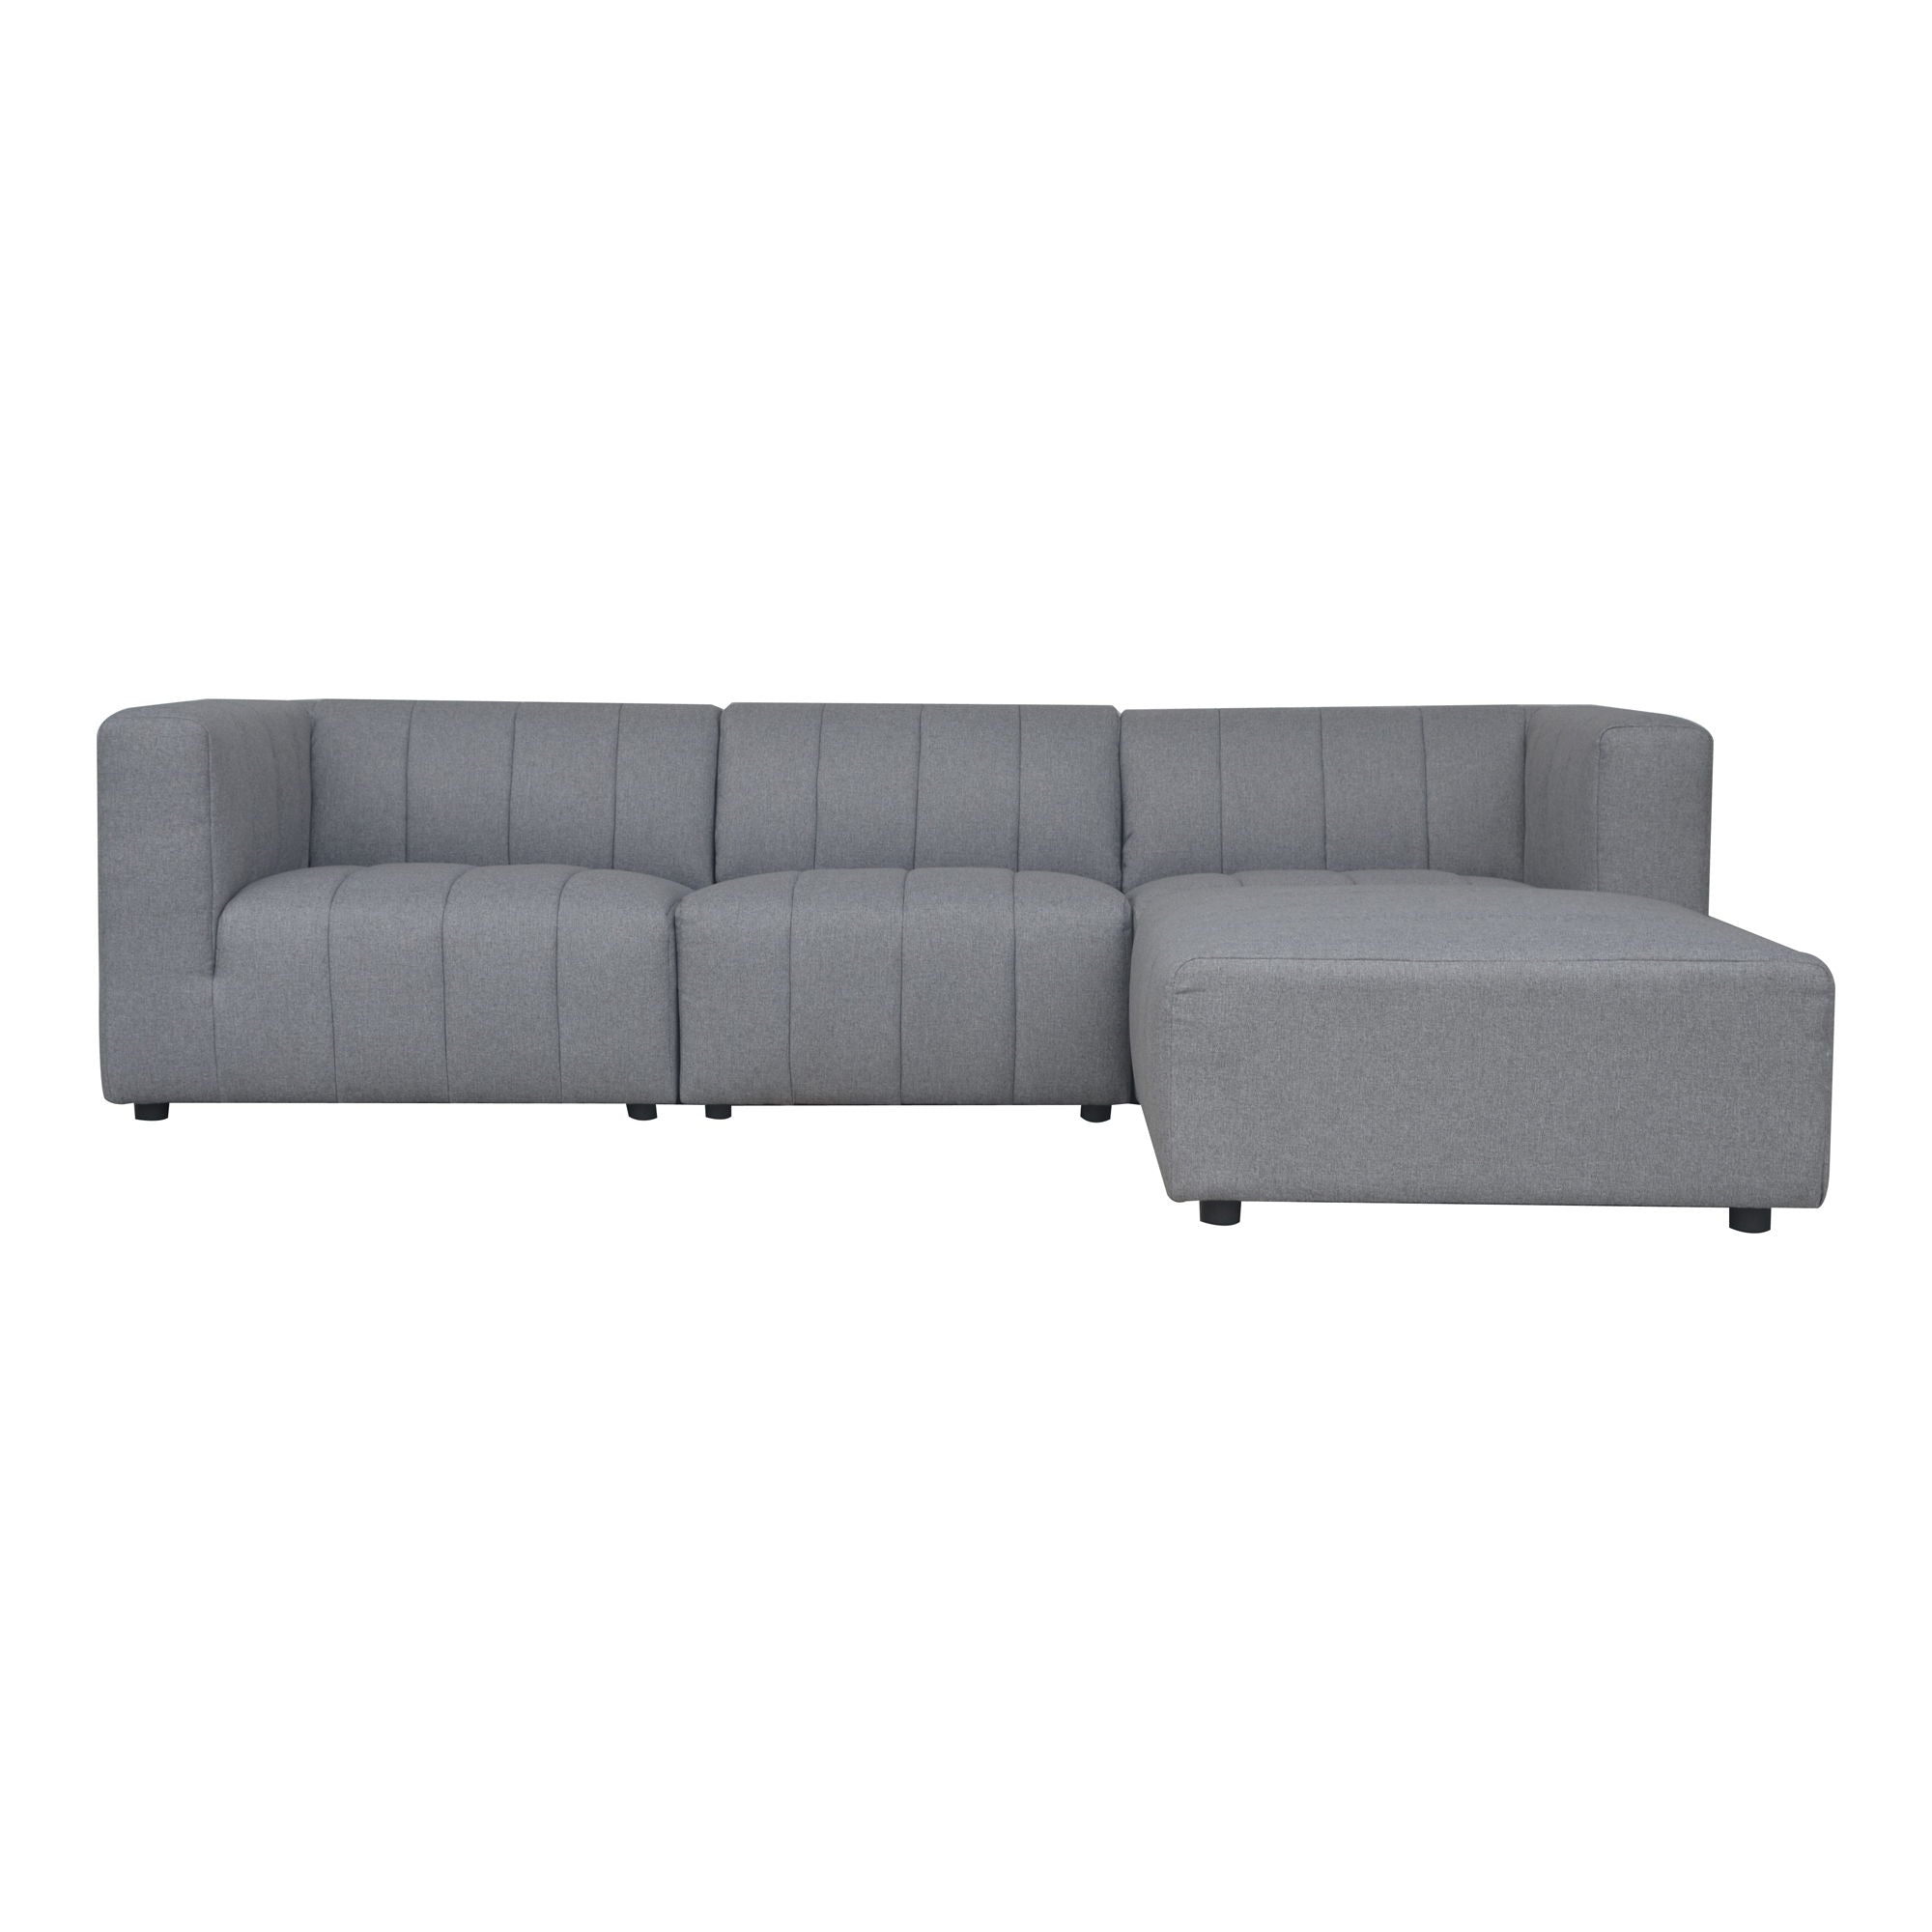 Lyric - Lounge Modular Sectional Grey - Dark Gray-Stationary Sectionals-American Furniture Outlet